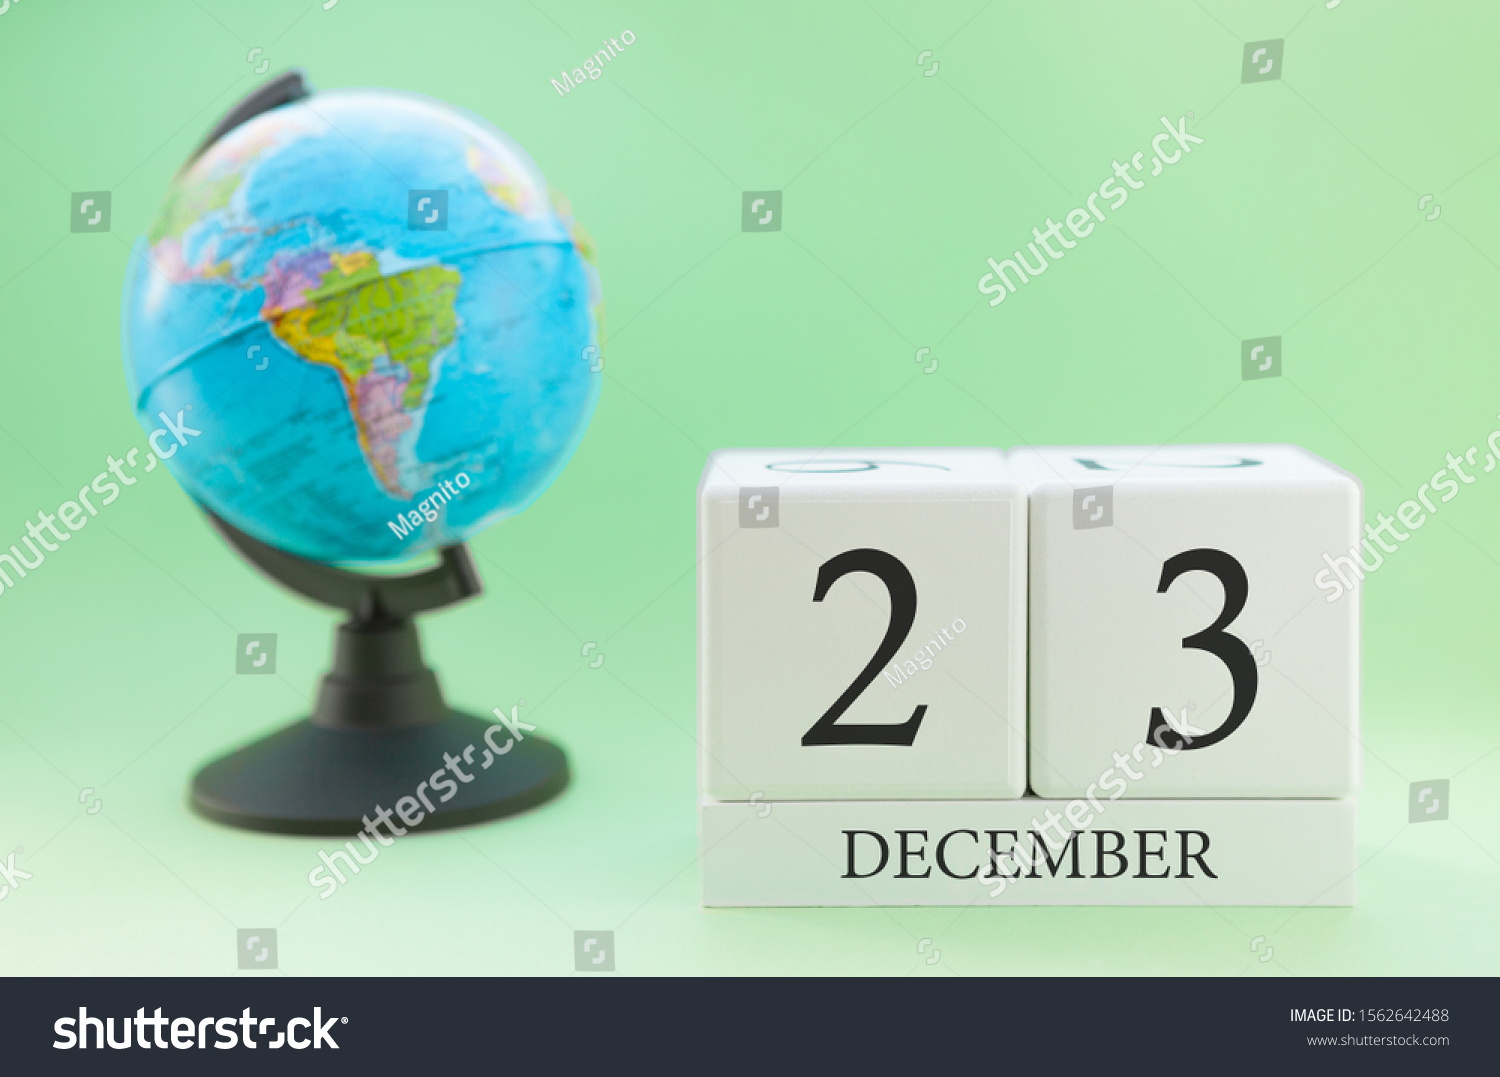 December 23. December month. White cube with numbers and globe on a blurred green background. The concept of New Year and Christmas holidays. #1562642488